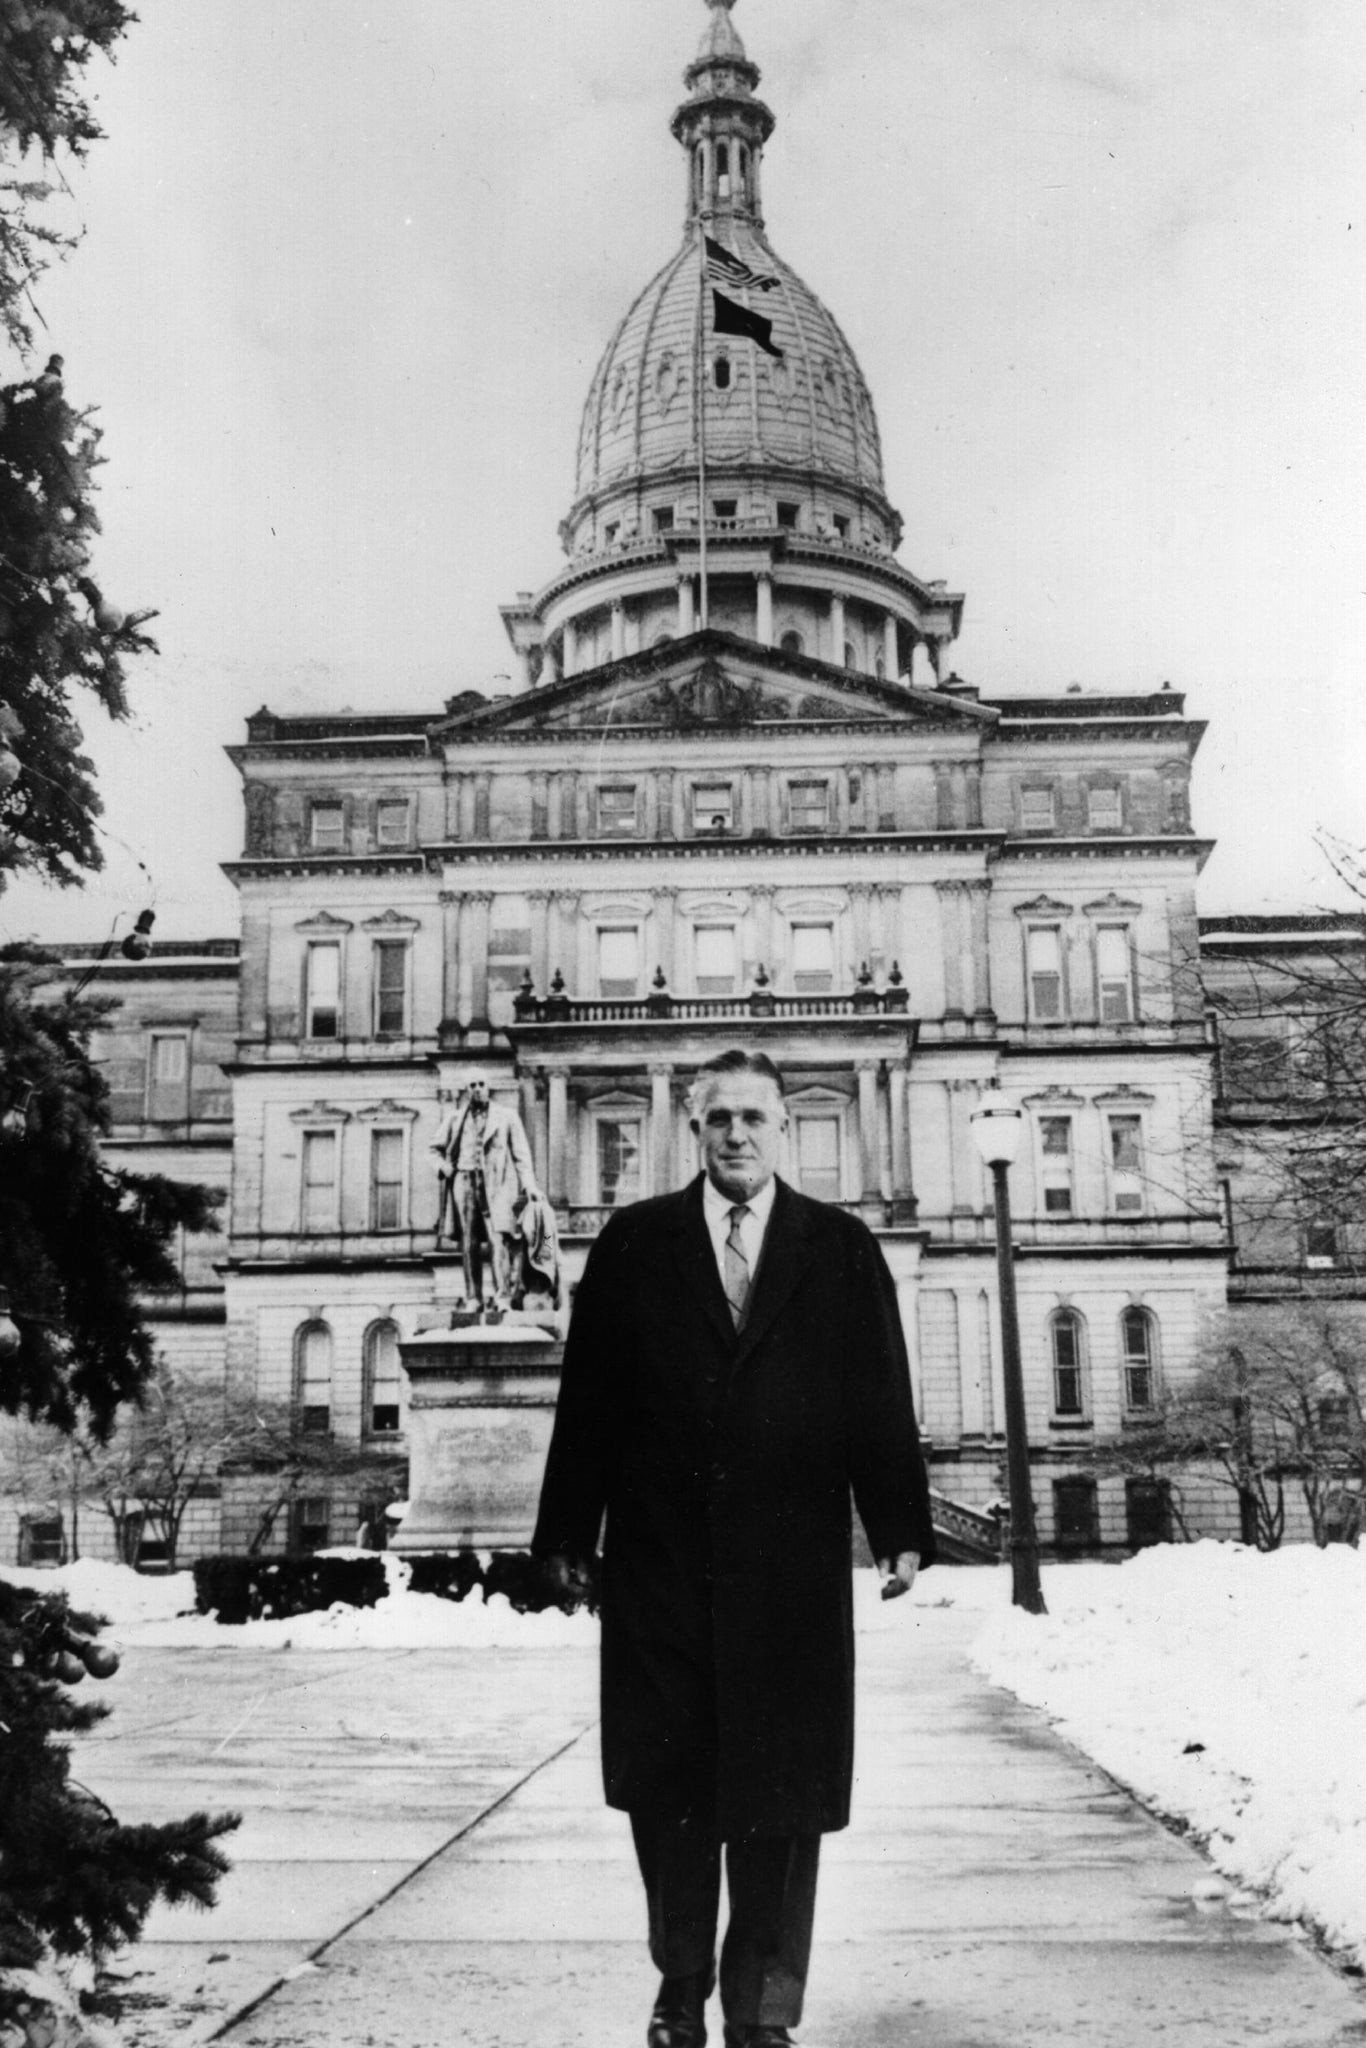 Portrait of Governor of Michigan George W. Romney (1907 - 1995) as he walks outside the Capitol Building in Lansing, Michigan, March 21, 1964.    (Photo by Alan Band/Keystone/Getty Images)